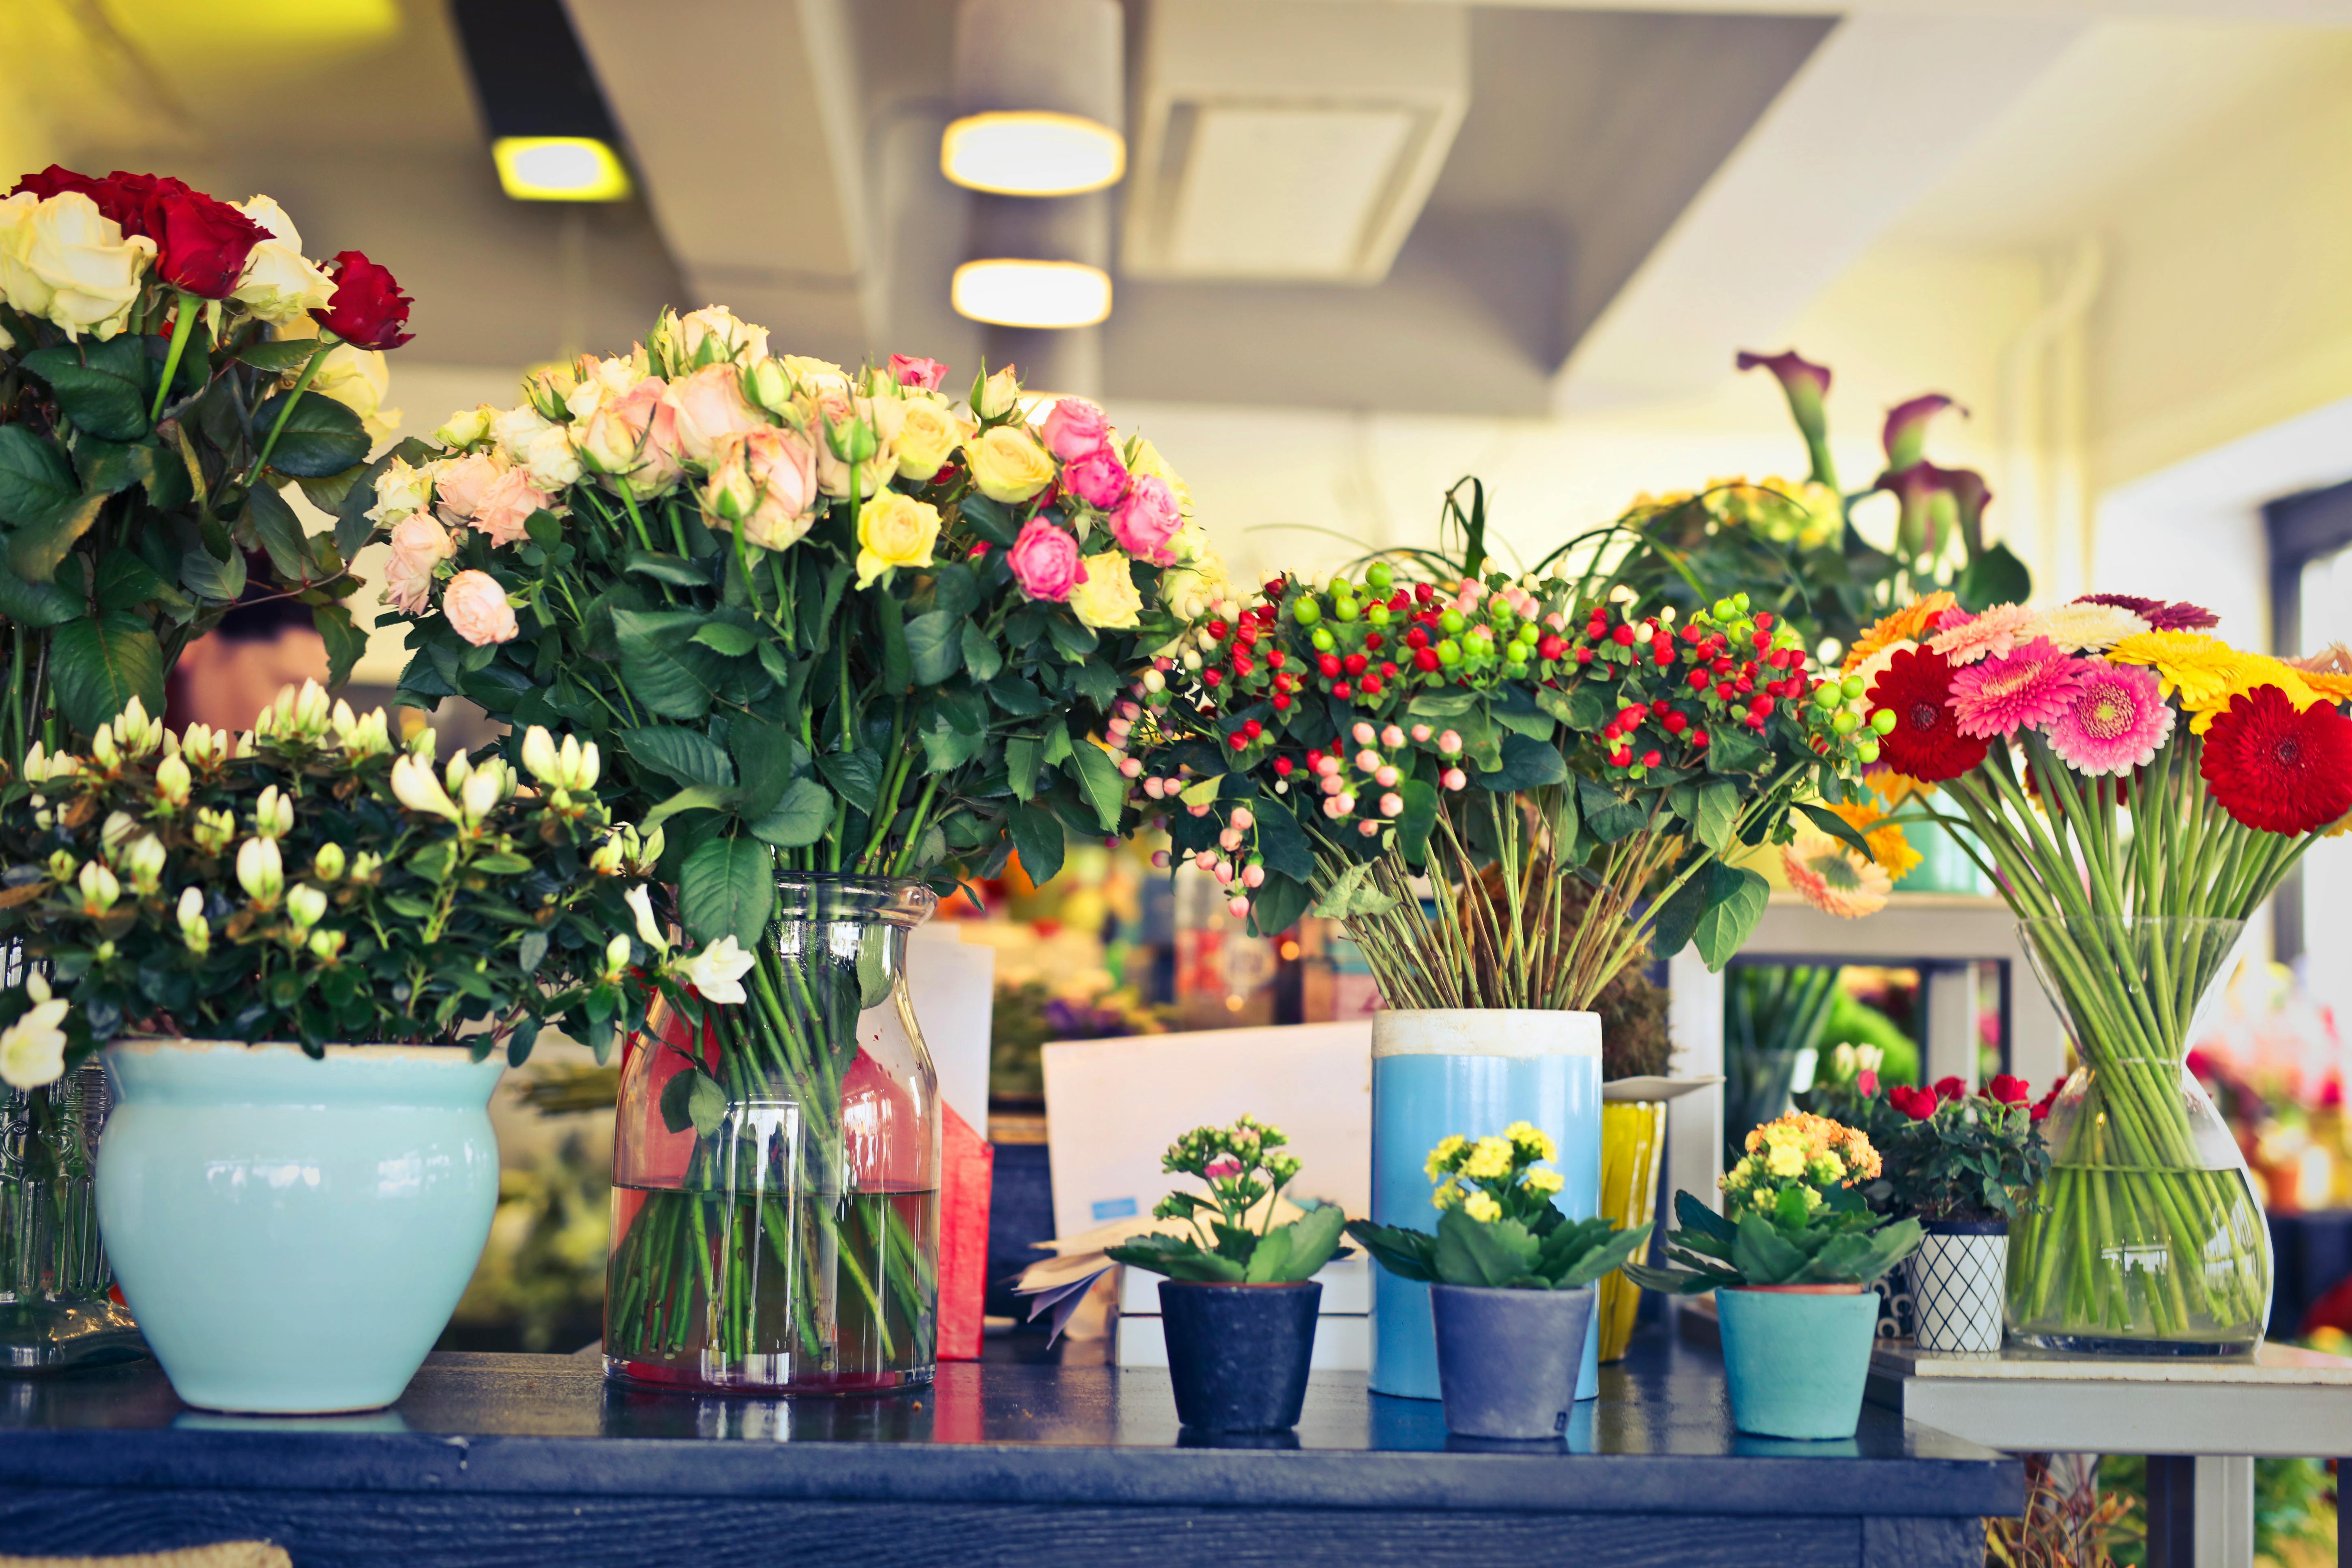 A table filled with flowers and vases | Source: Pexels